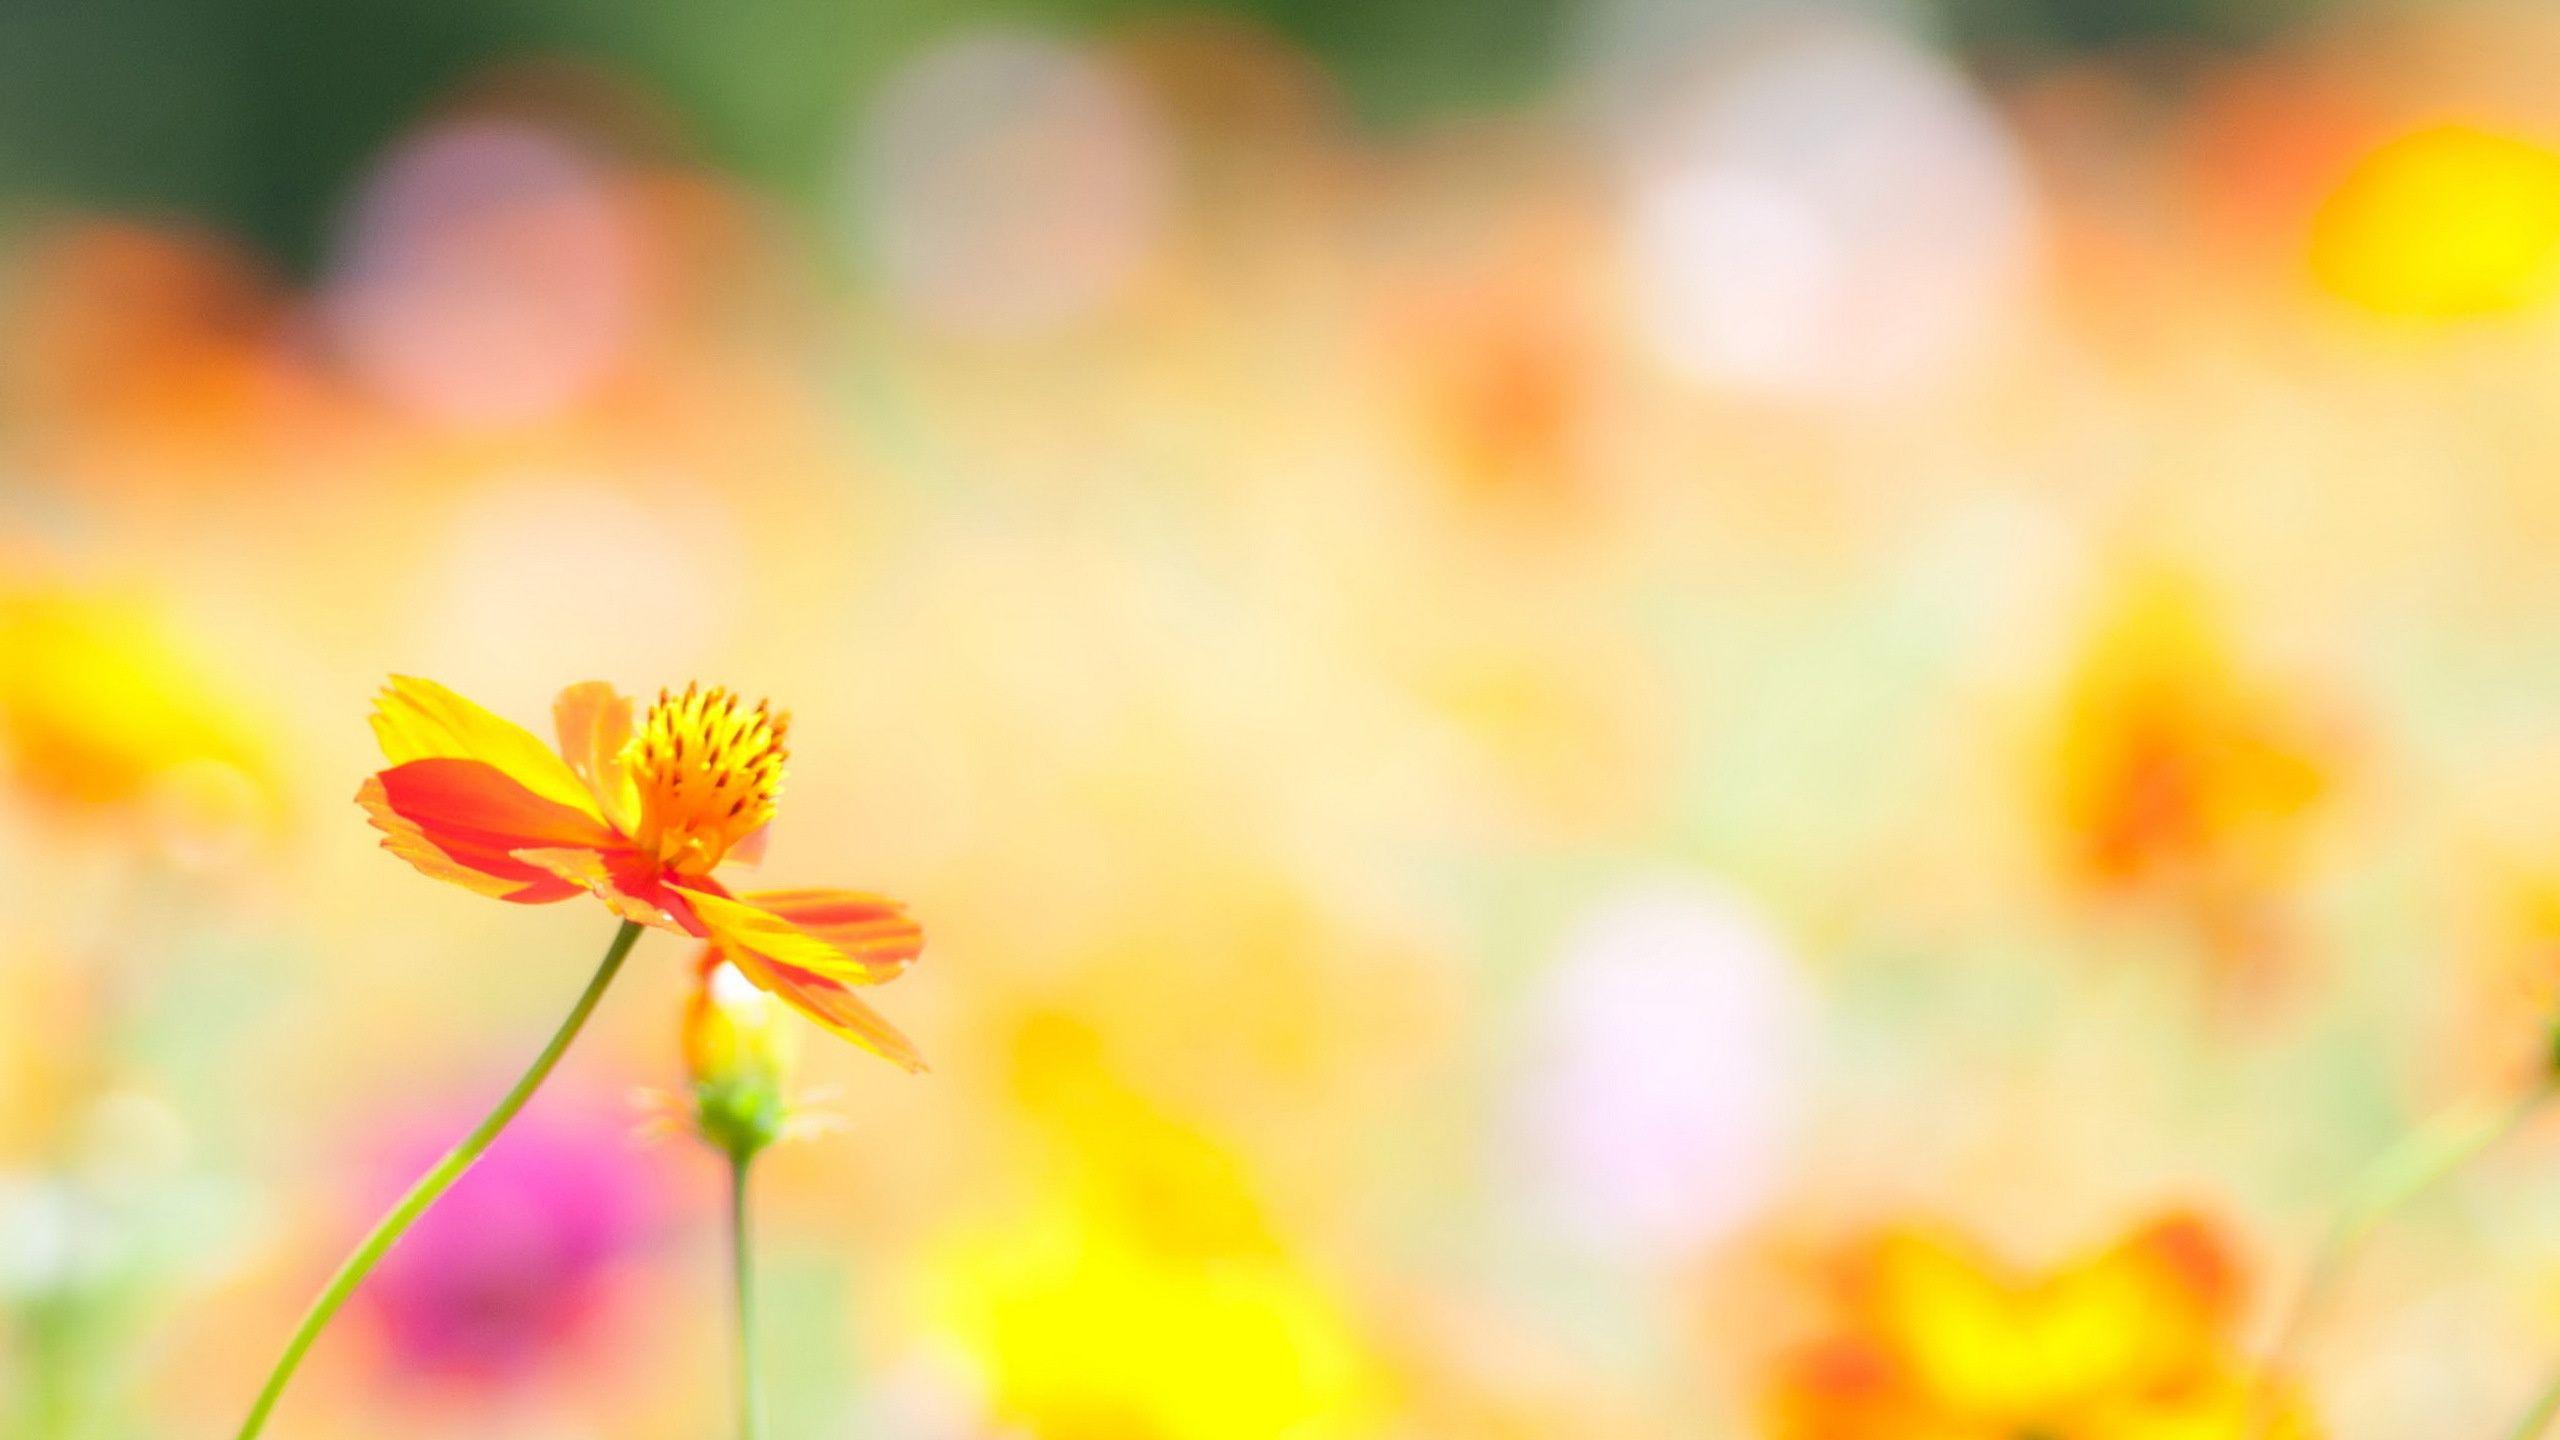 Summer Flower Background Image 6 HD Wallpaper. Hdimges